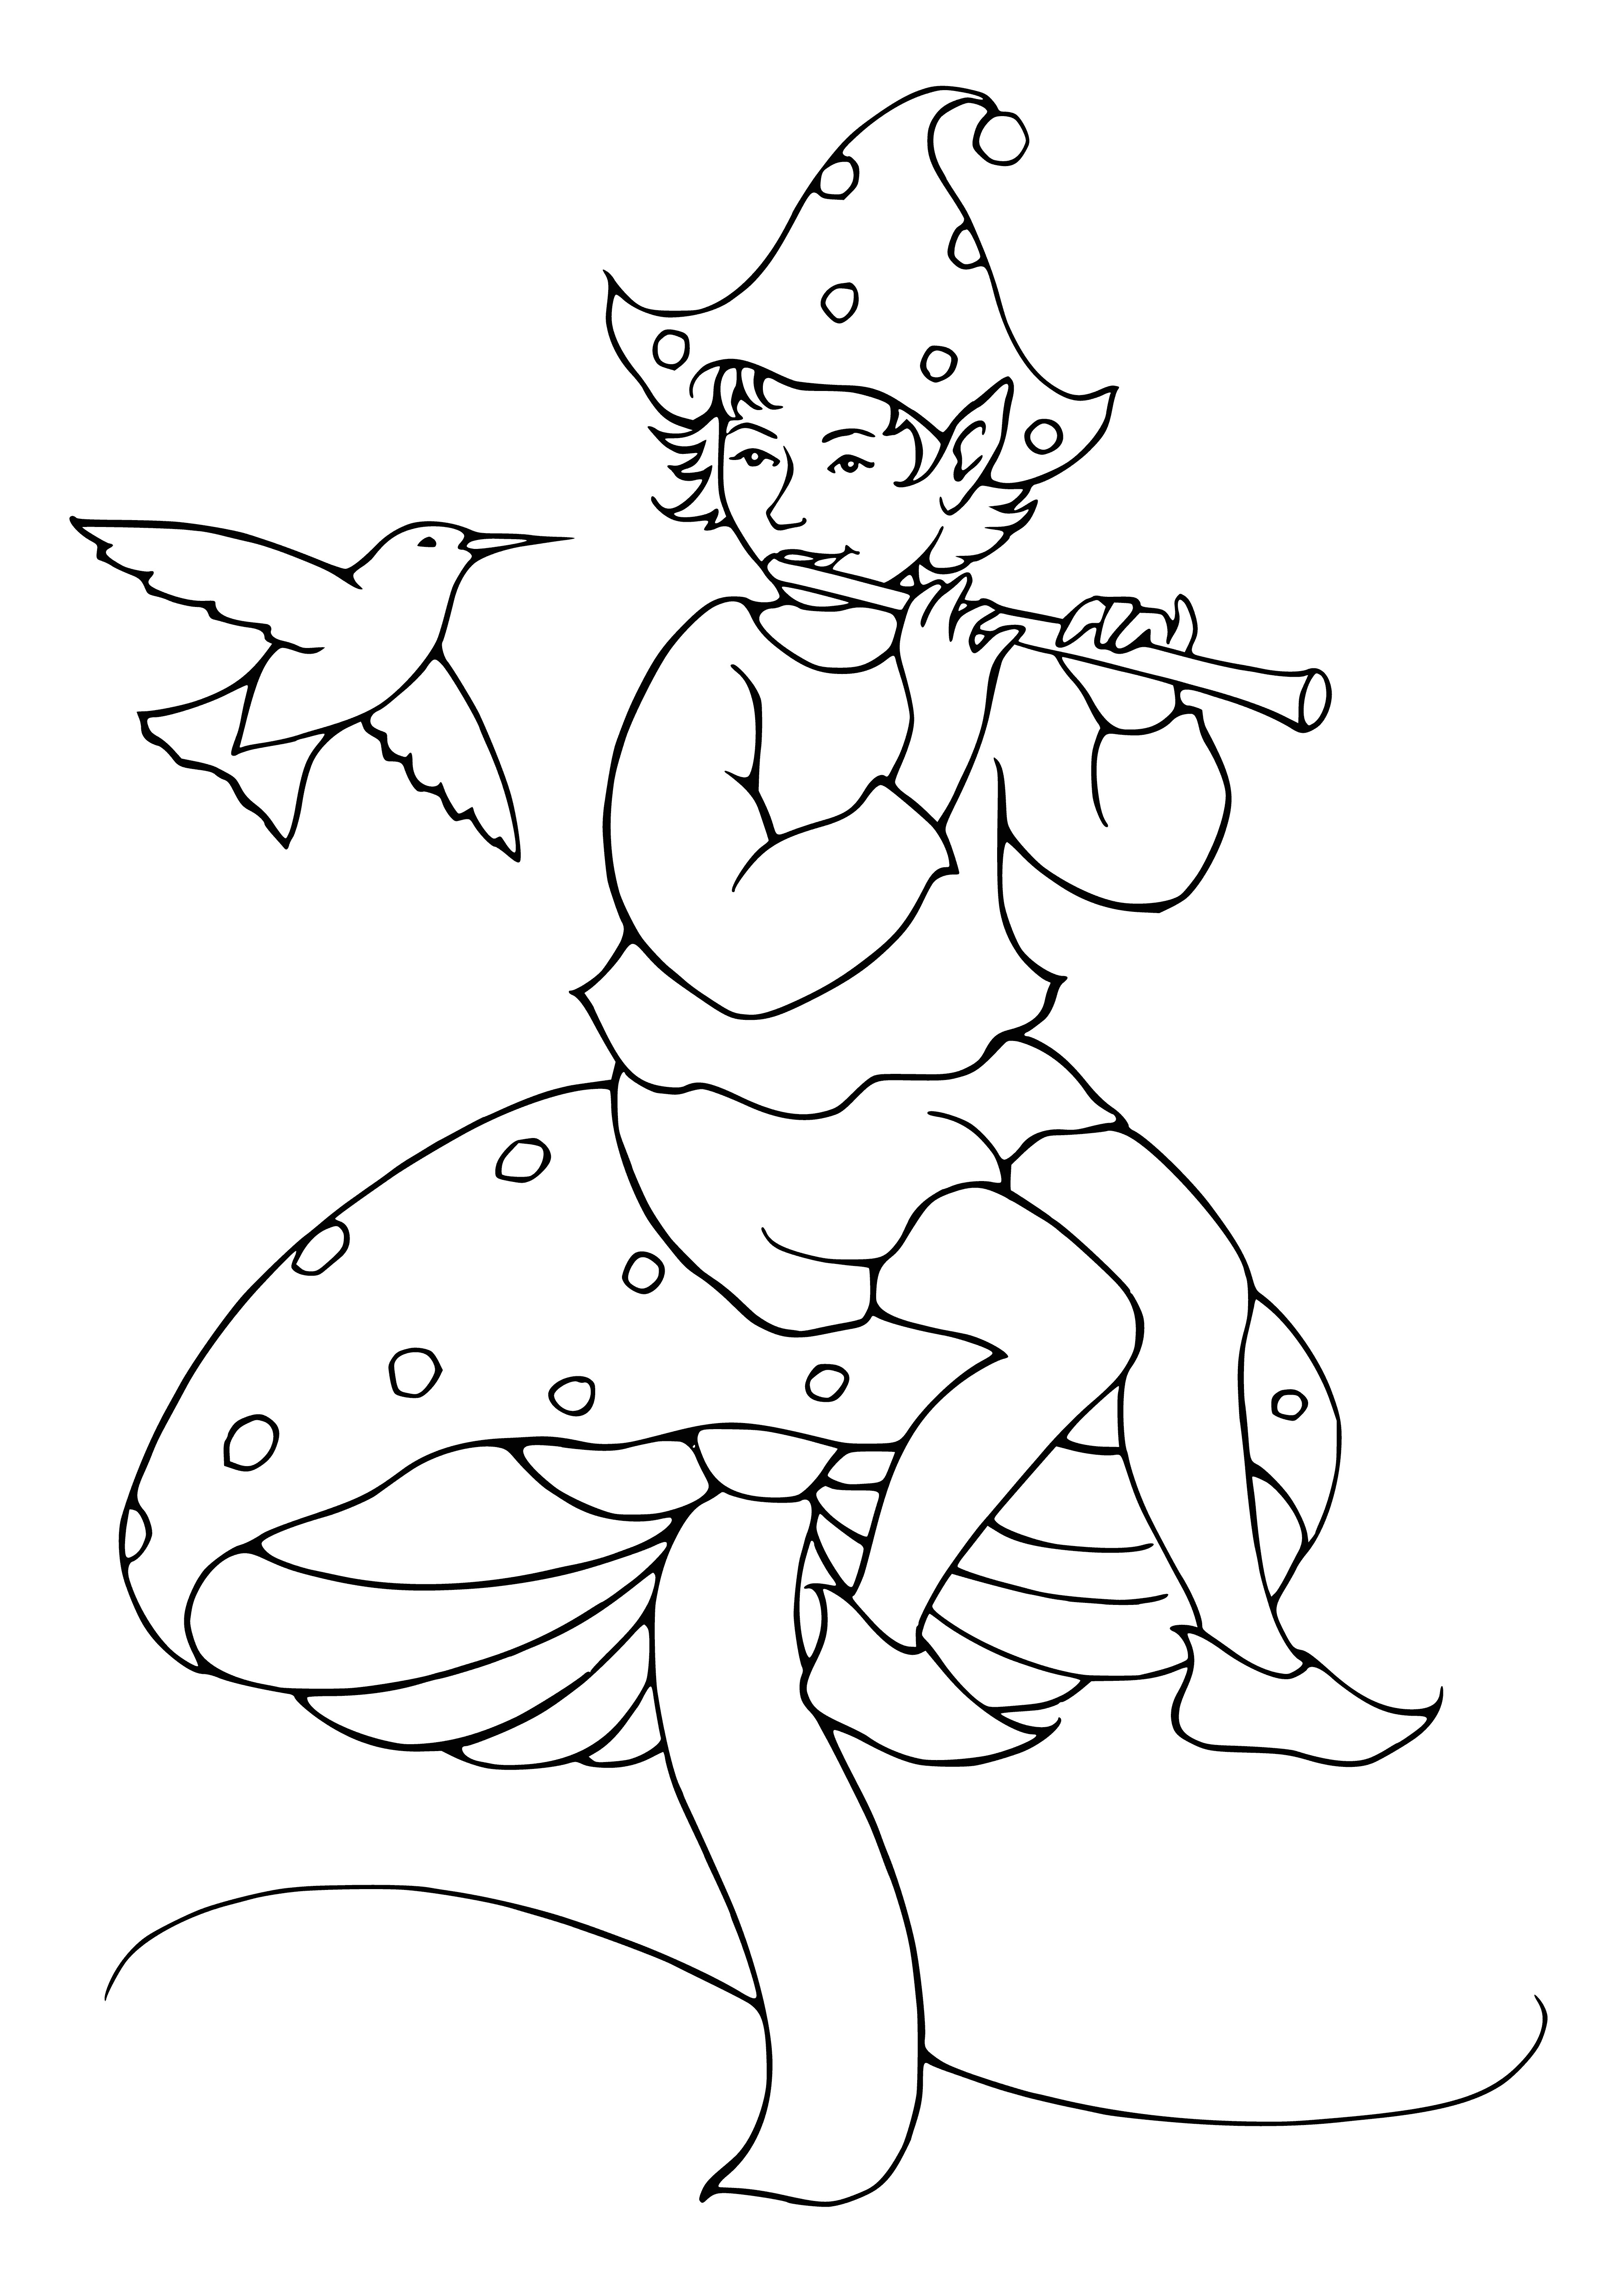 coloring page: A small, ethereal creature with pointy ears plays a pipe while wearing a long, flowing robe. Delicate features complete its otherworldly appearance.